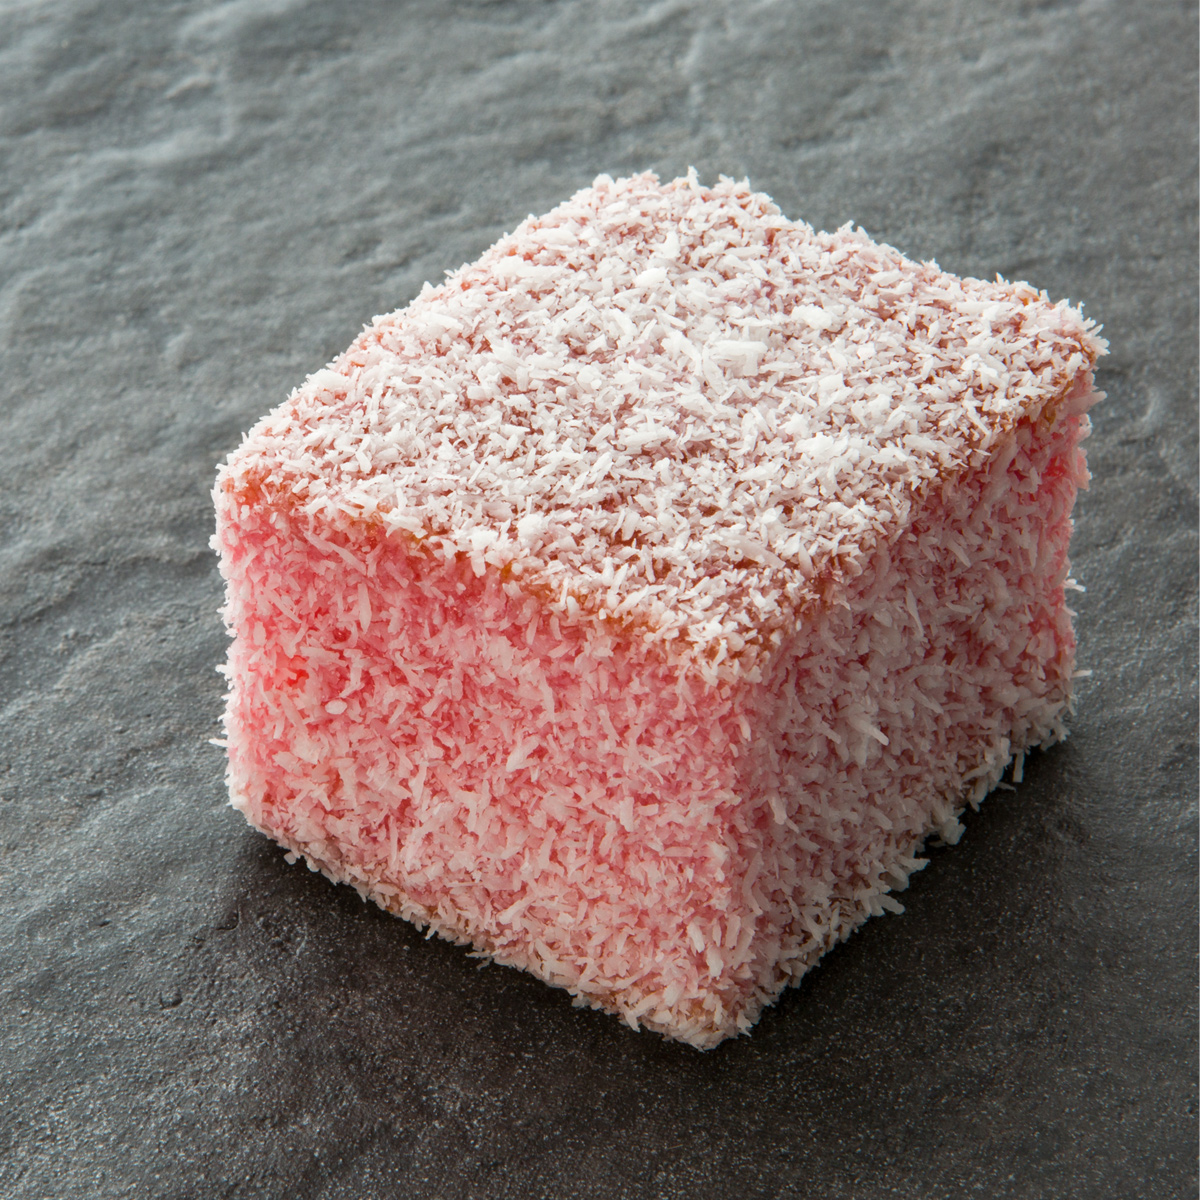 Where to find the best lamingtons in Sydney